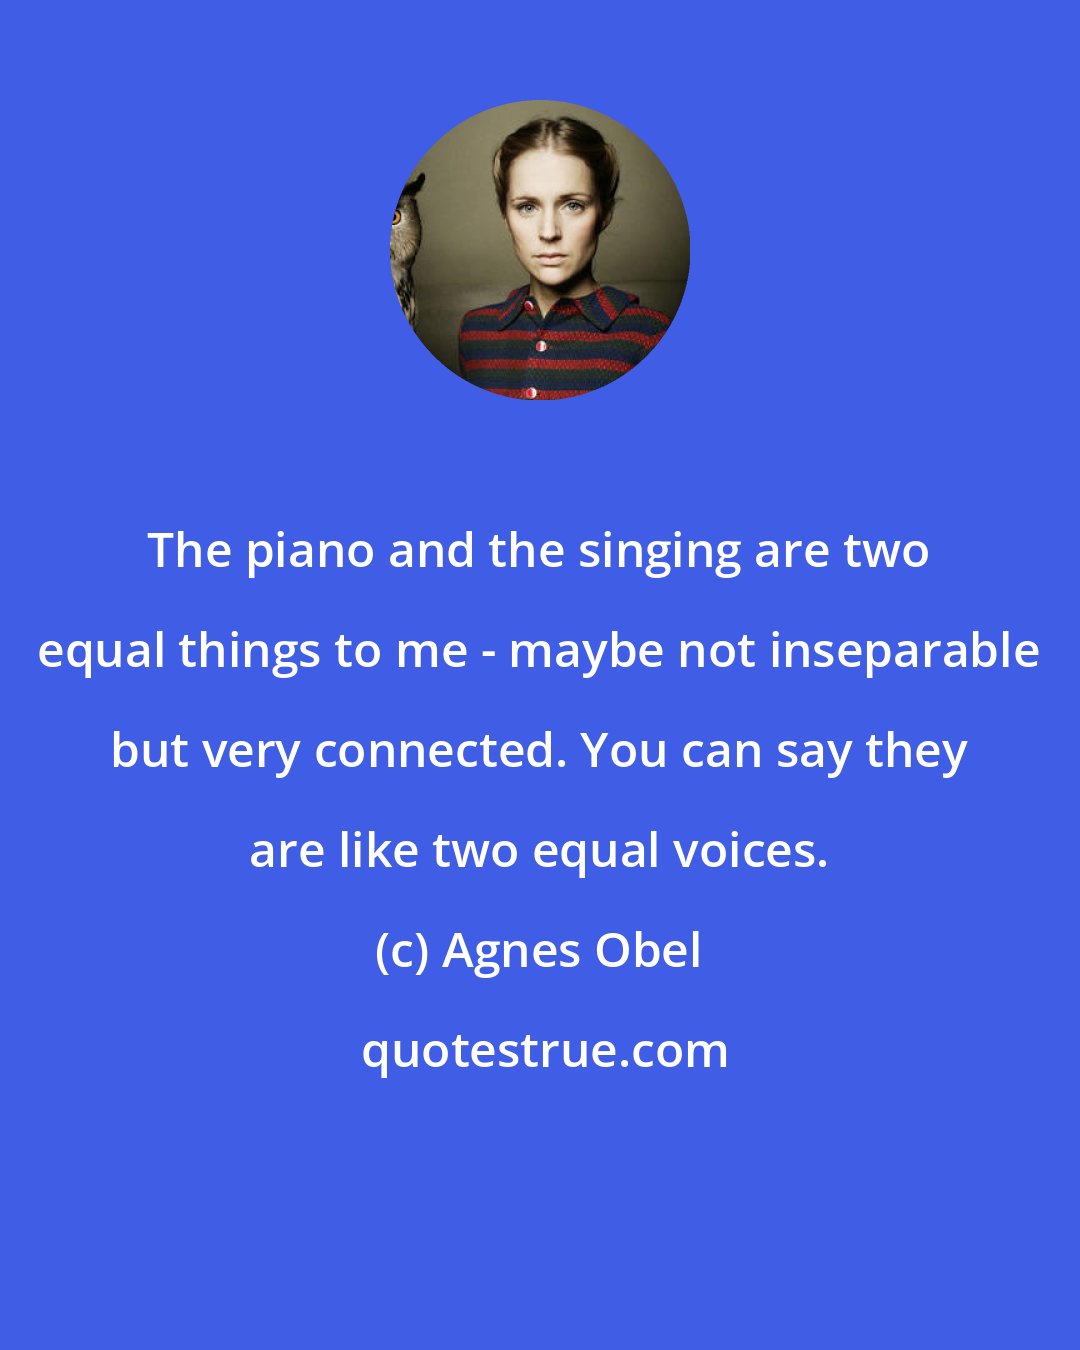 Agnes Obel: The piano and the singing are two equal things to me - maybe not inseparable but very connected. You can say they are like two equal voices.